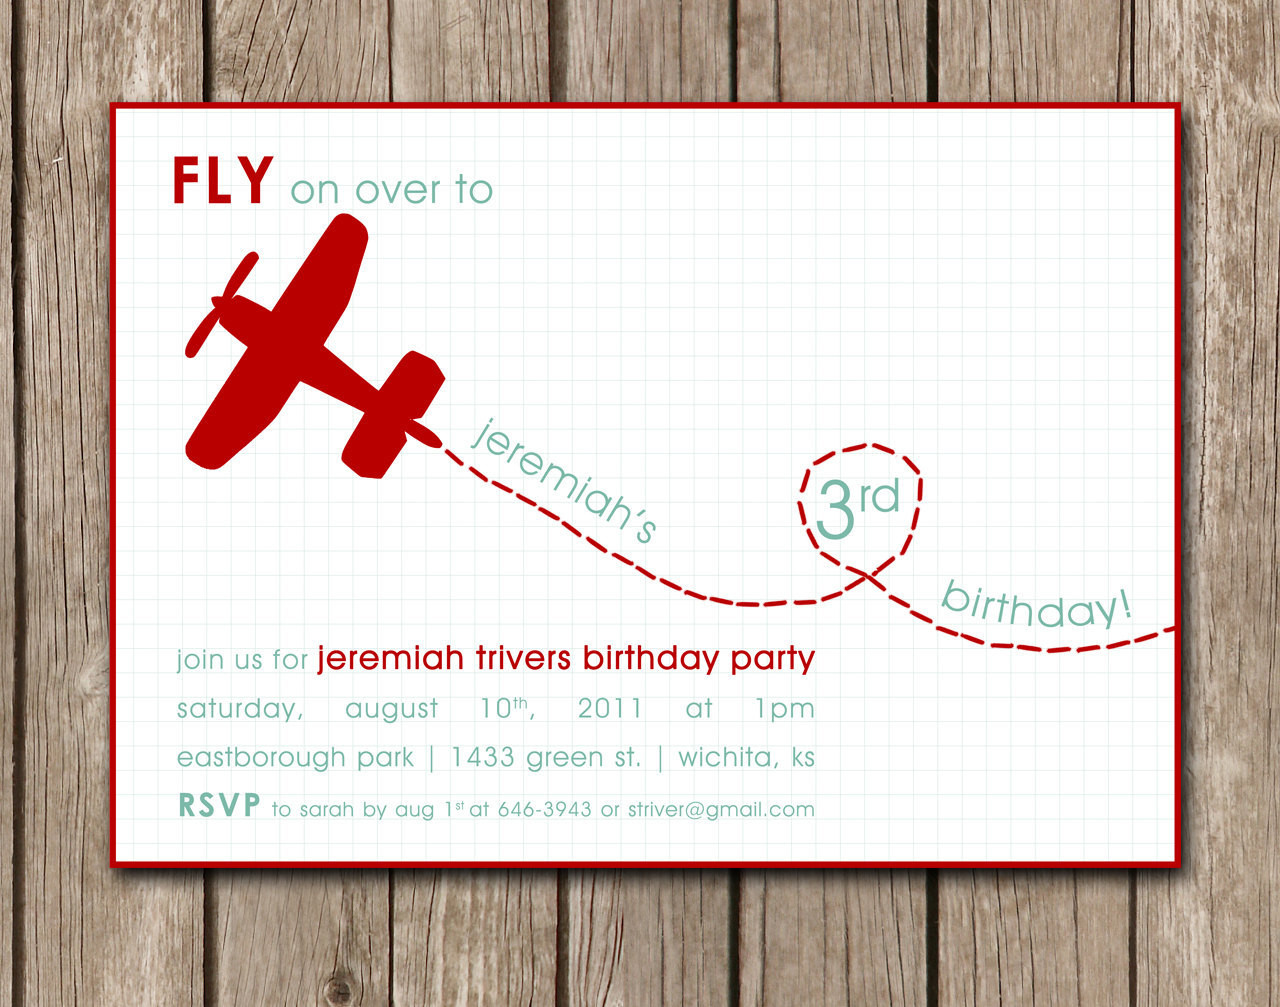 Airplane Birthday Invitations
 PRINTED Airplane Birthday Party Invitation perfect for an